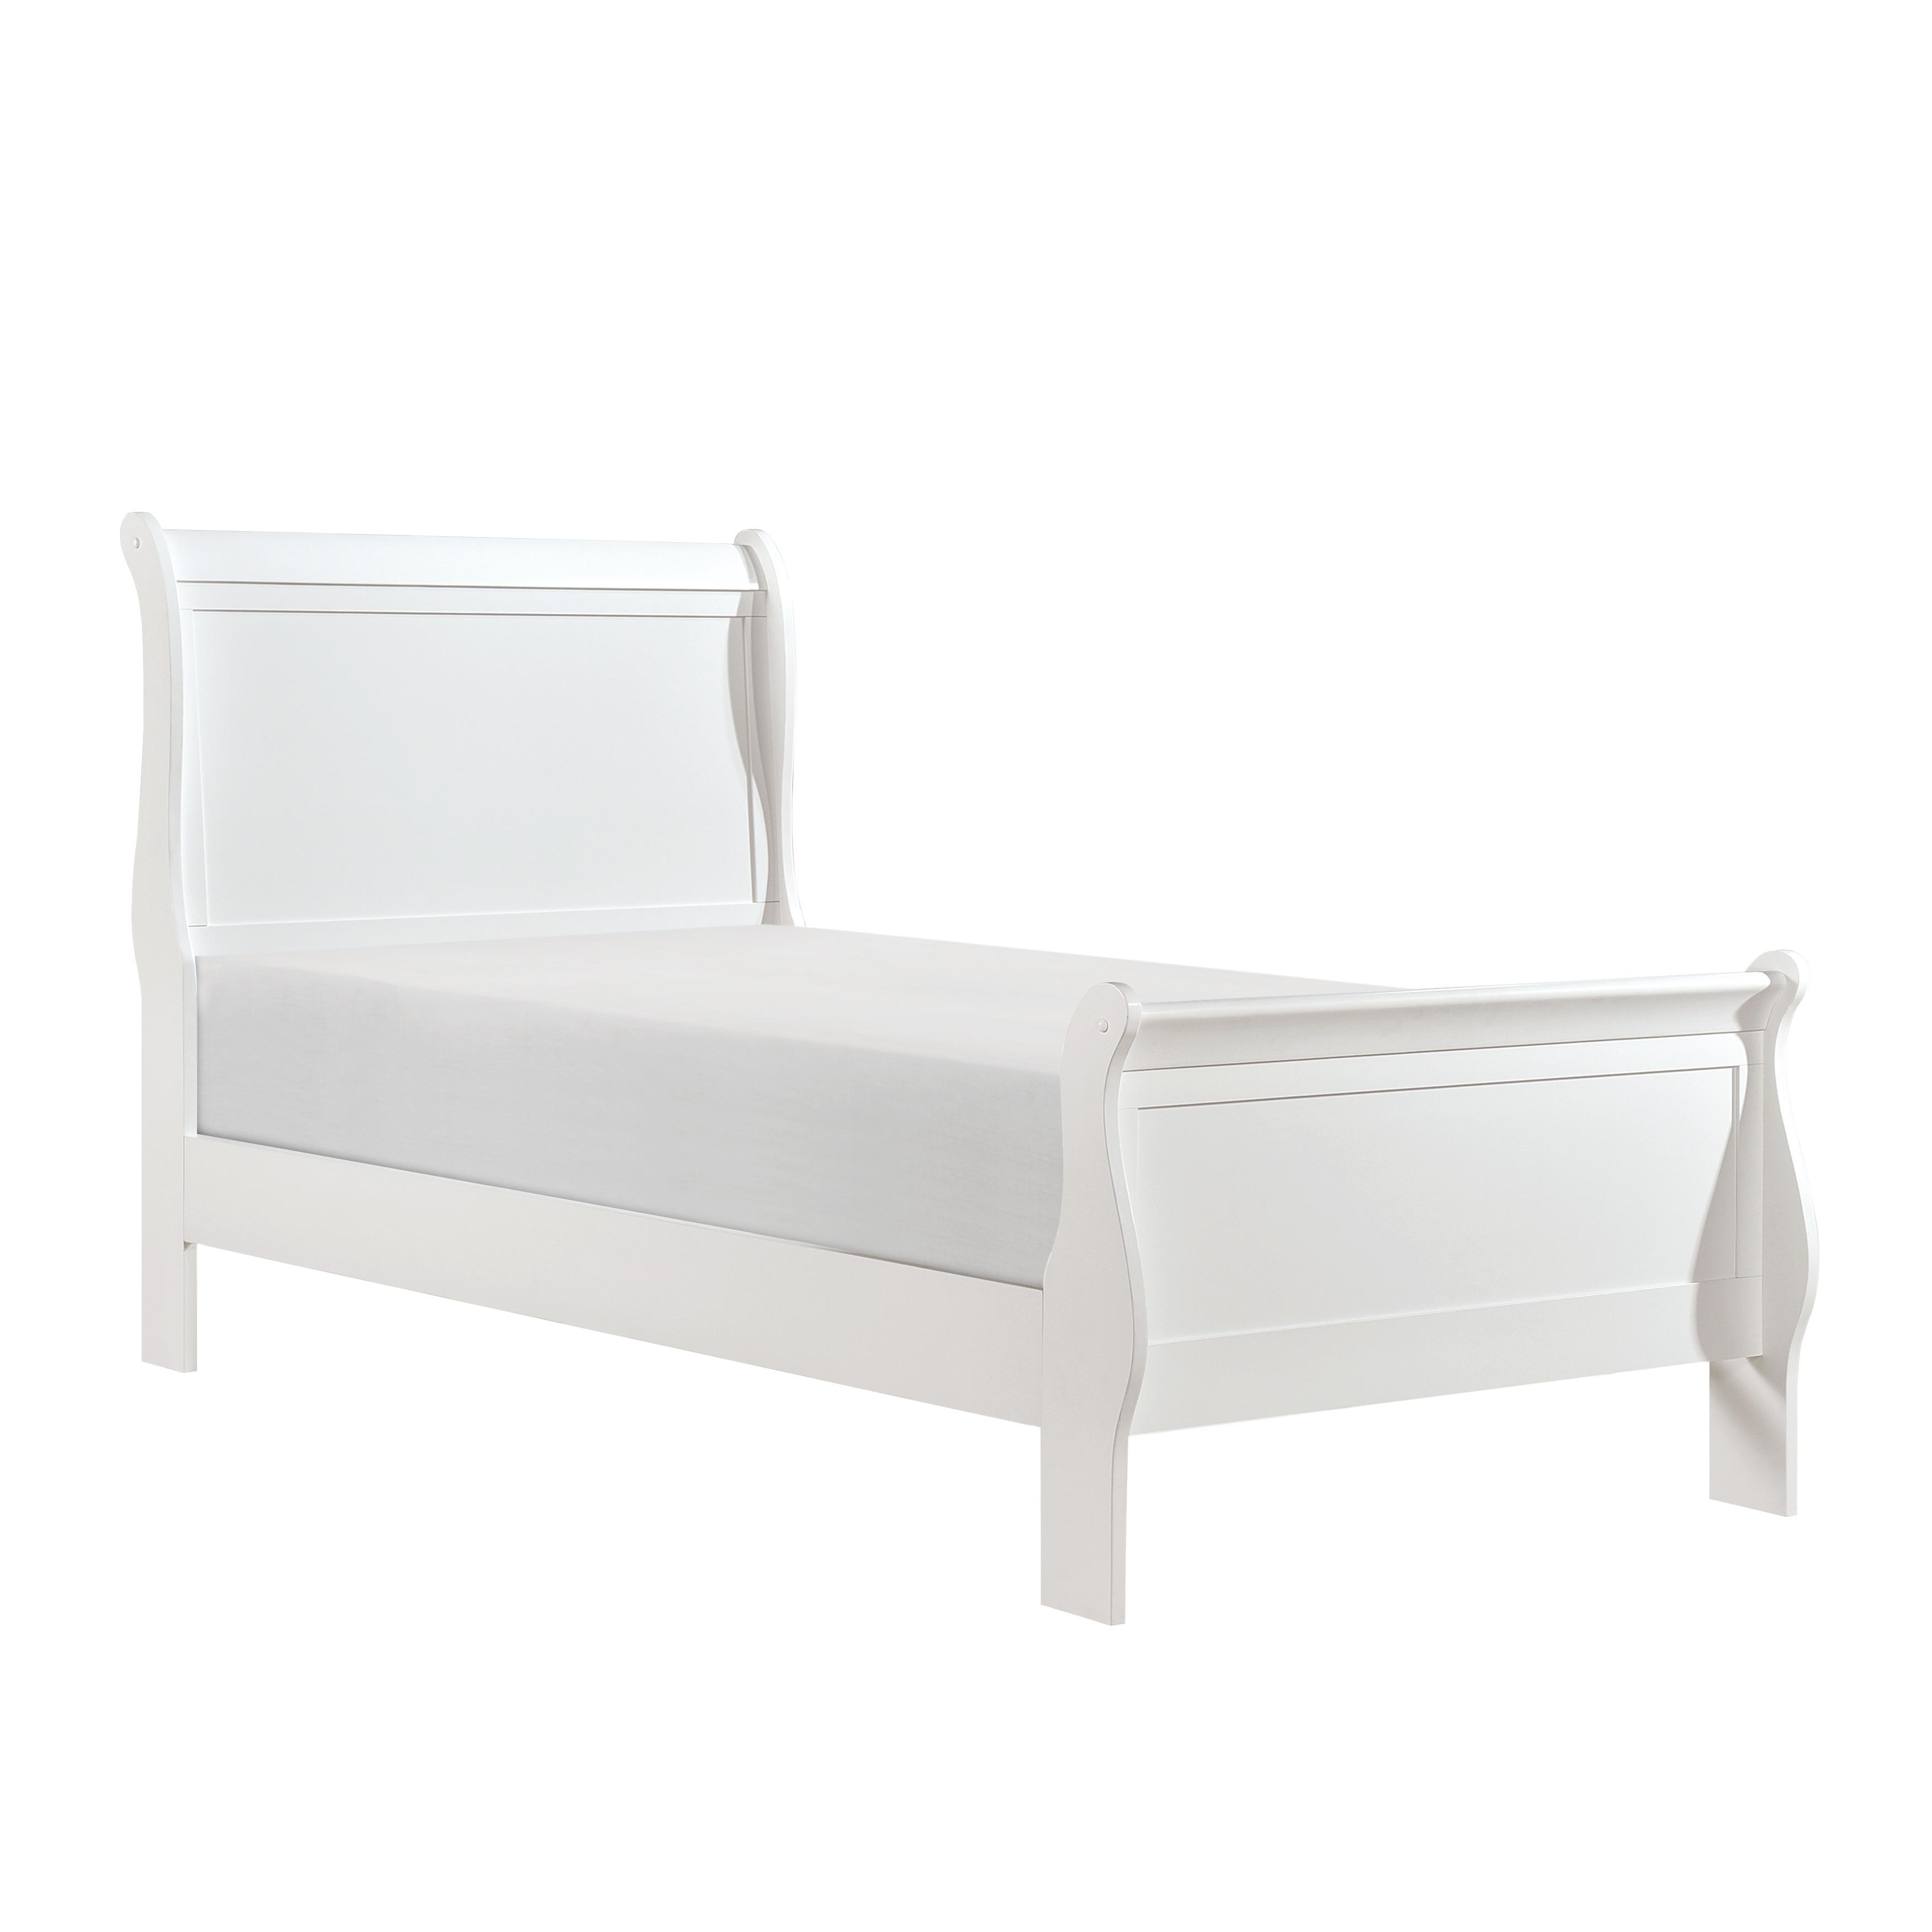 

    
Traditional White Wood Twin Bed Homelegance 2147TW-1* Mayville
